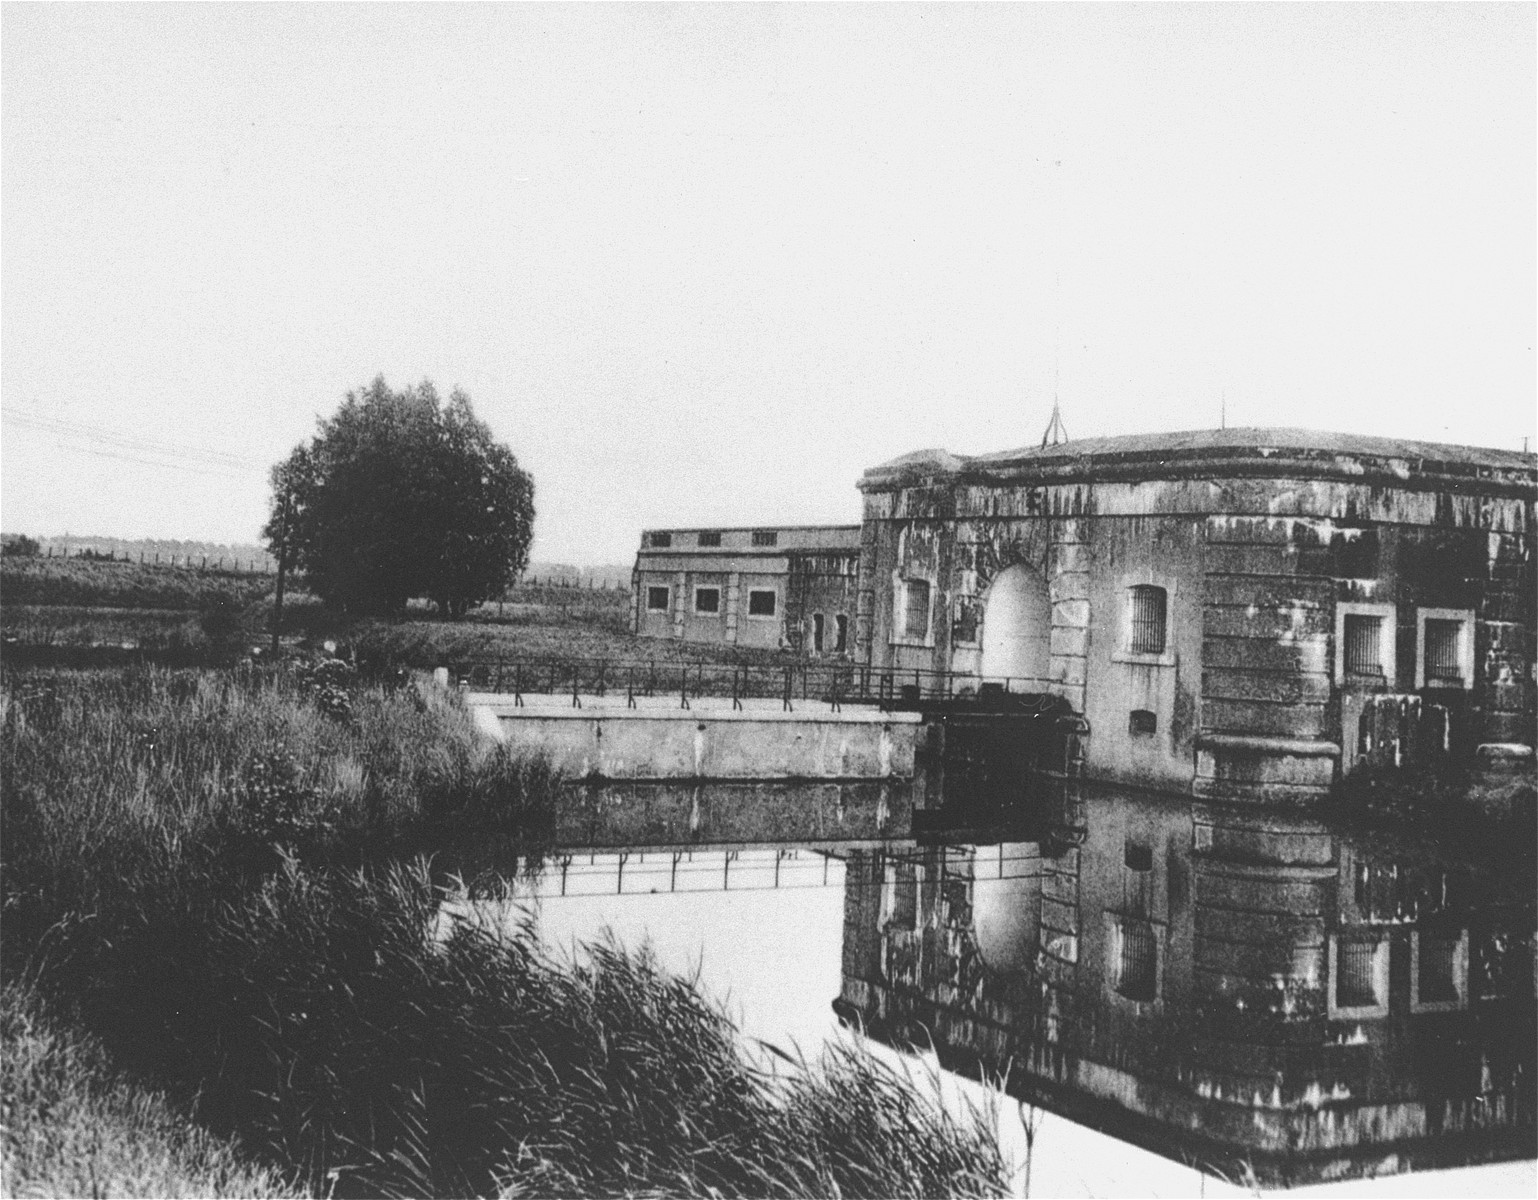 The entrance to the Breendonck fortress/transit camp.  This image is from a series of snap shots sold on the site after the war.